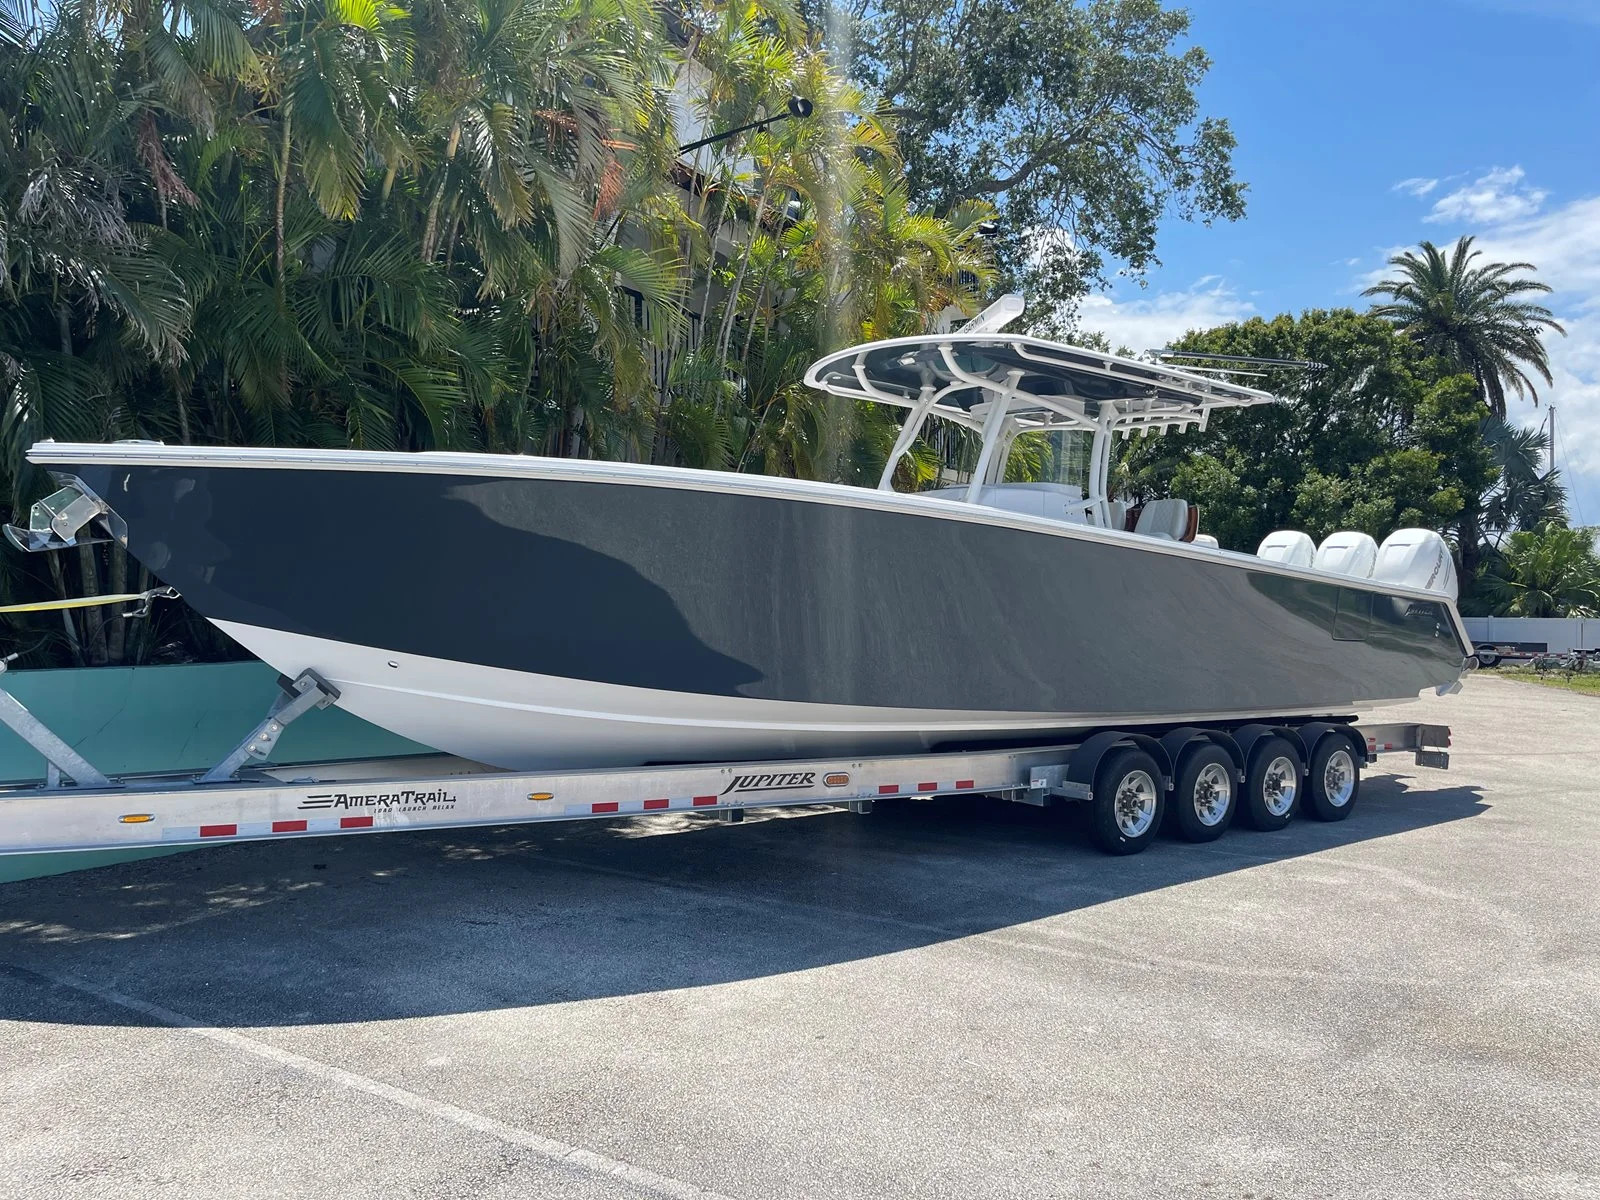 2022 Jupiter 38 HFS Center Console for sale - YachtWorld